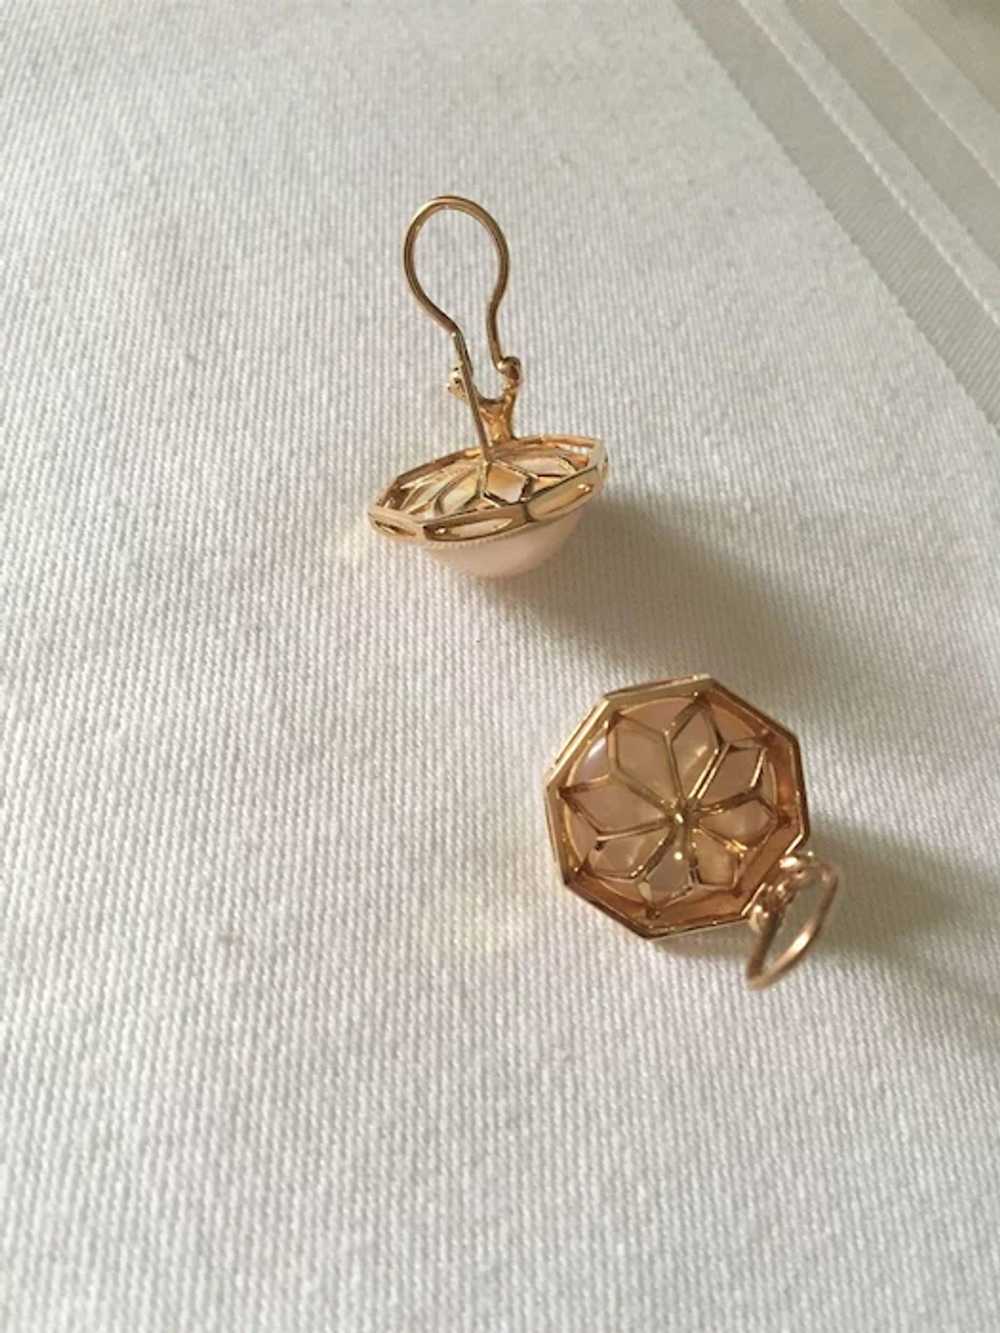 14K Gold Octagonal Mabé Cultured Pearl Earrings - image 6